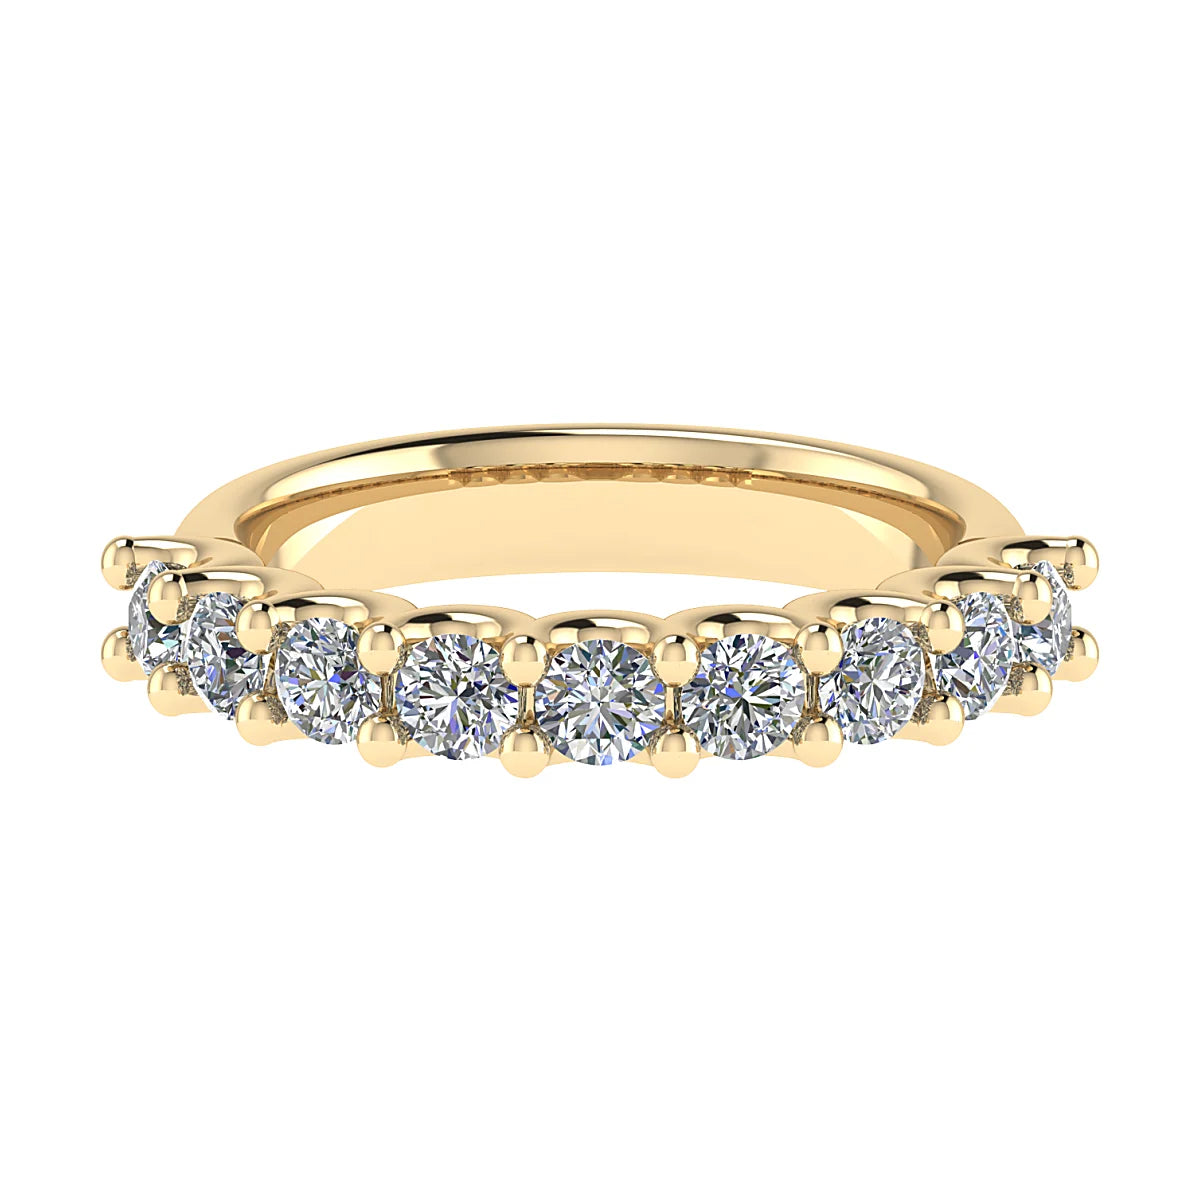 CLAW FRENCH SCALLOPED DIAMOND ETERNITY/WEDDING RING